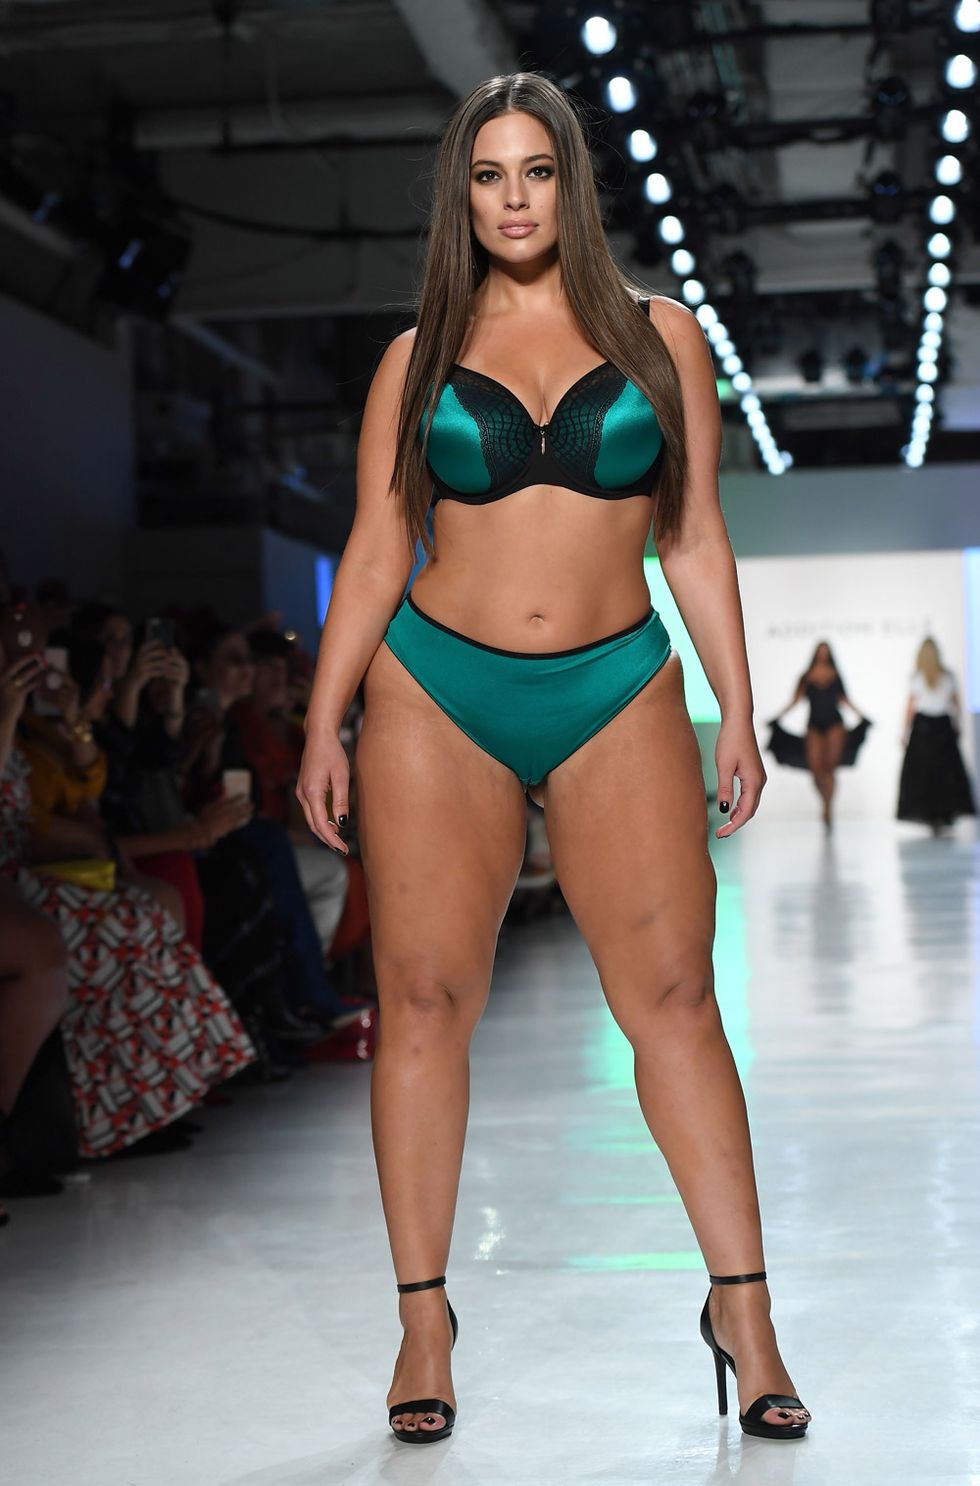 Forget Victoria's Secret, Ashley Graham's lingerie NYFW show is the one we  should be celebrating